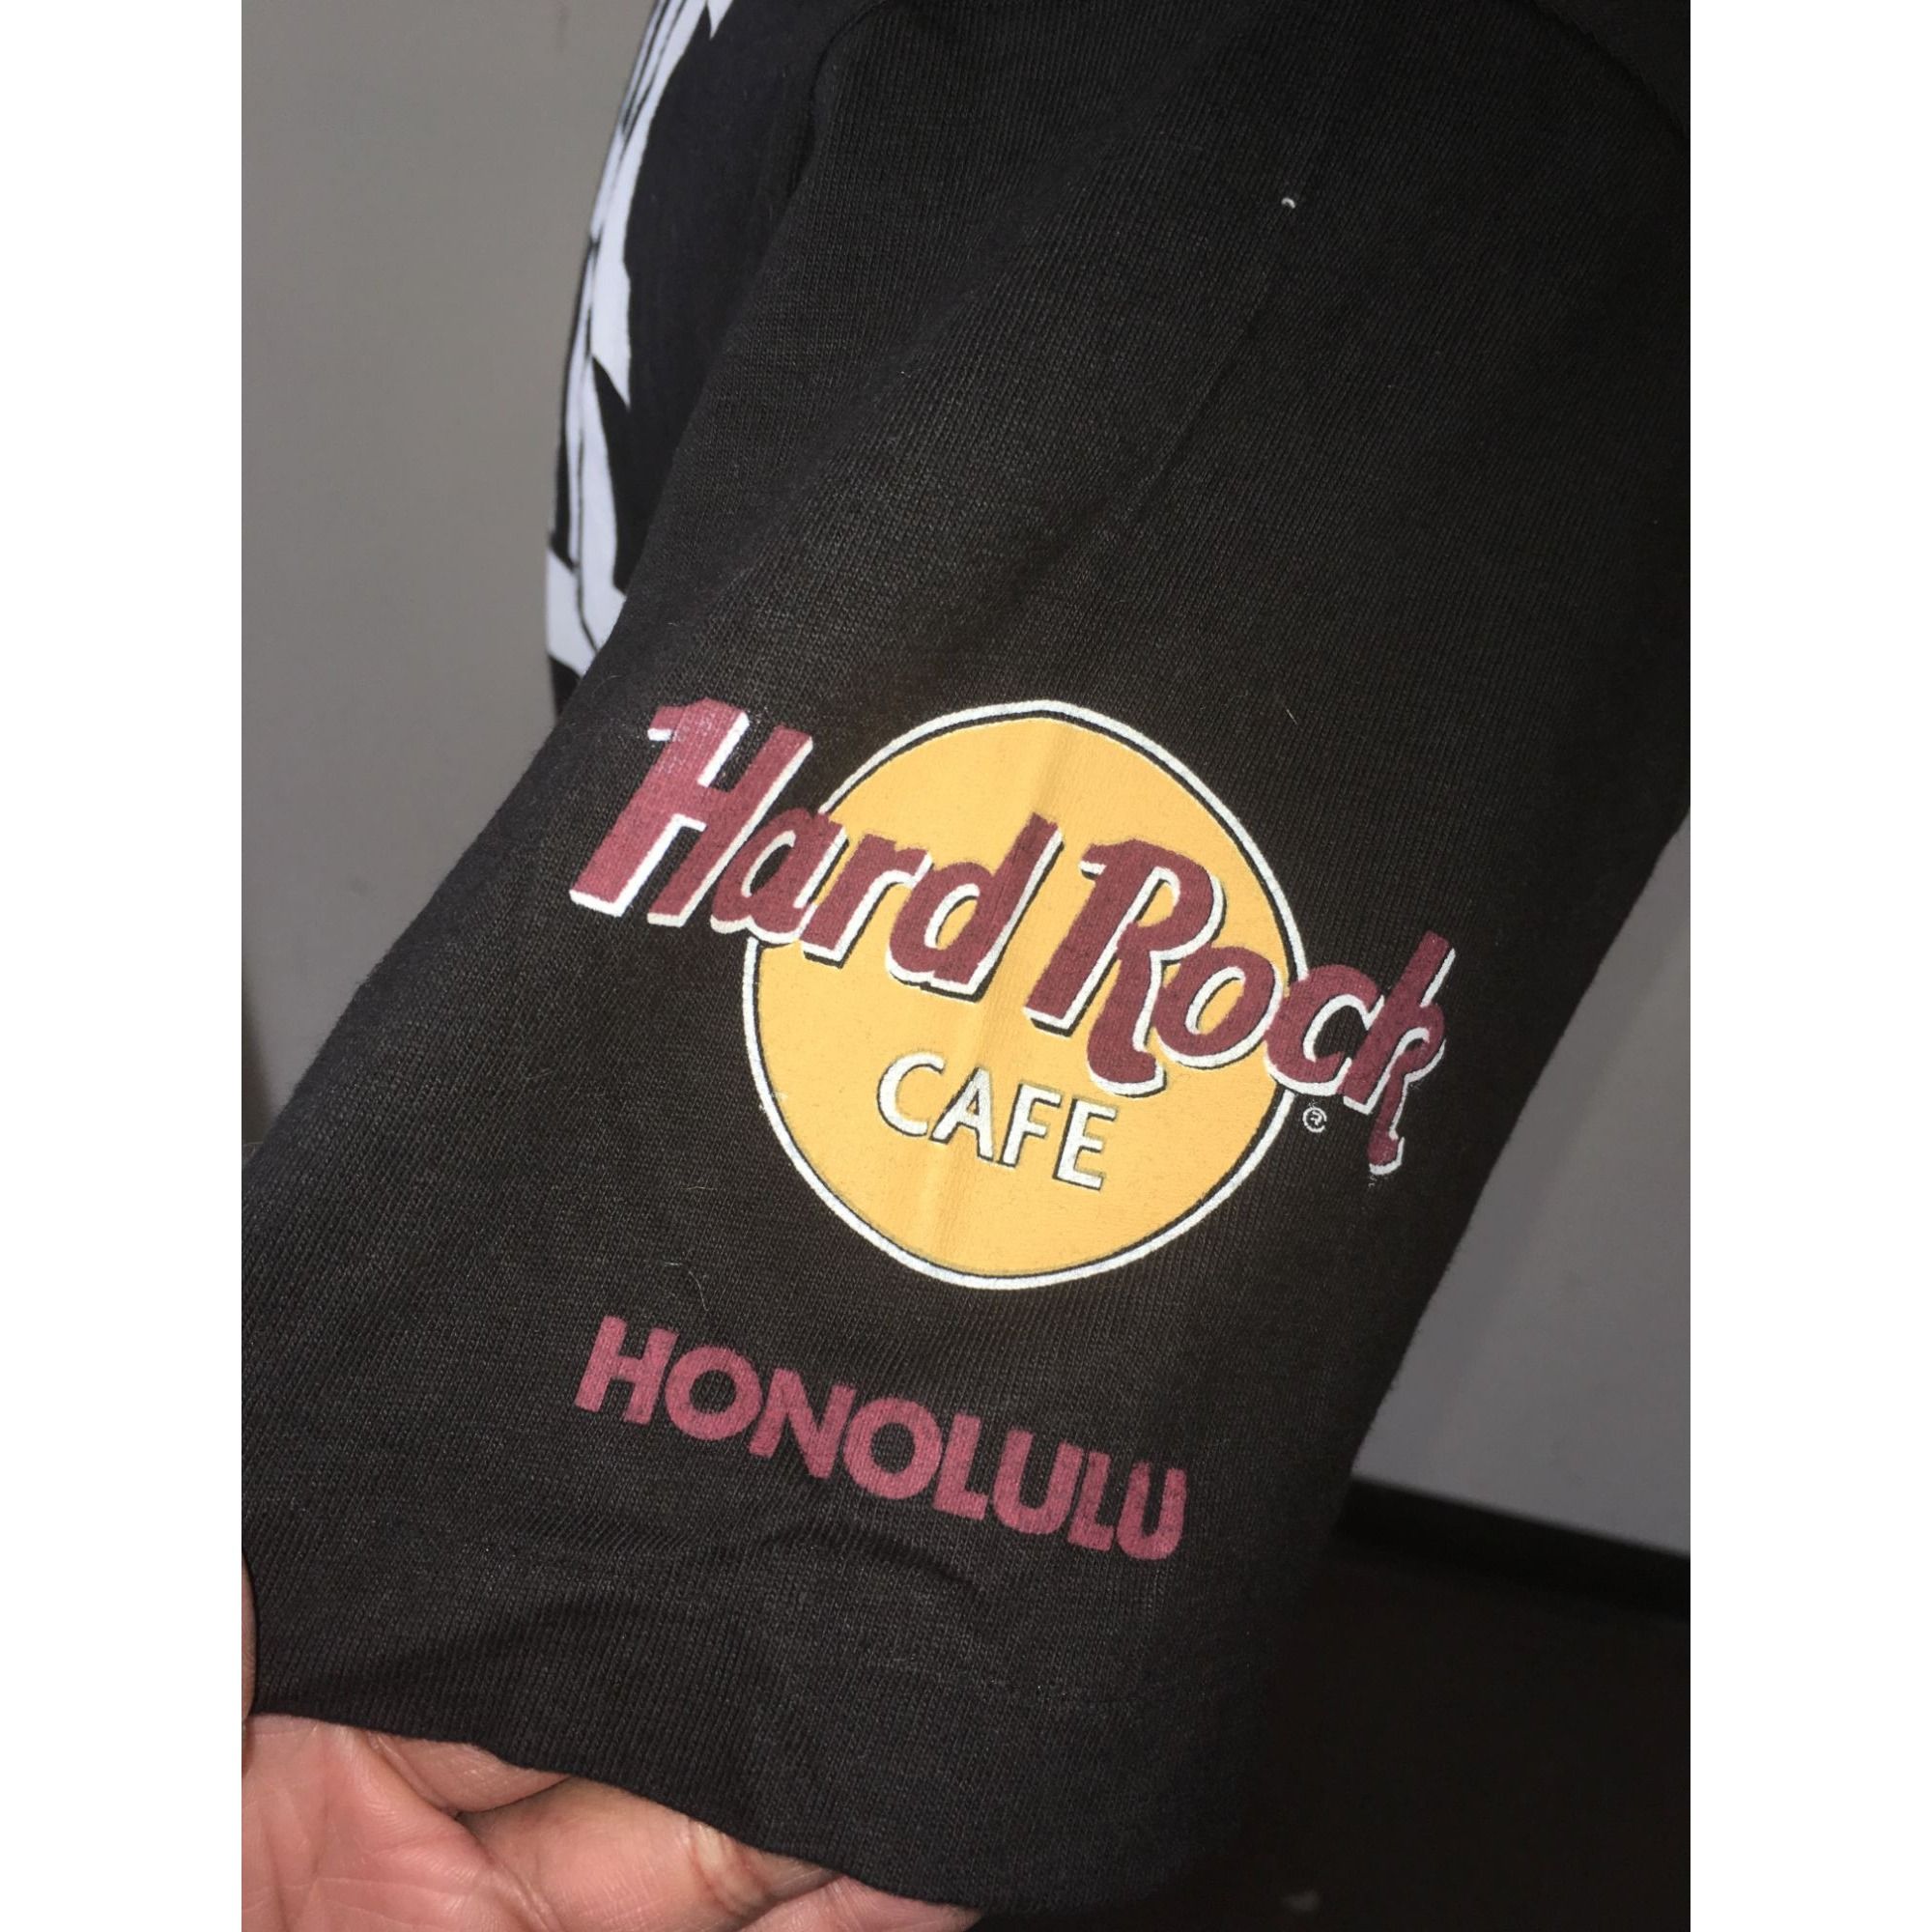 Hard Rock Cafe Hard Rock Cafe Honolulu Save the Planet Men's Black and Whit Size US L / EU 52-54 / 3 - 6 Preview